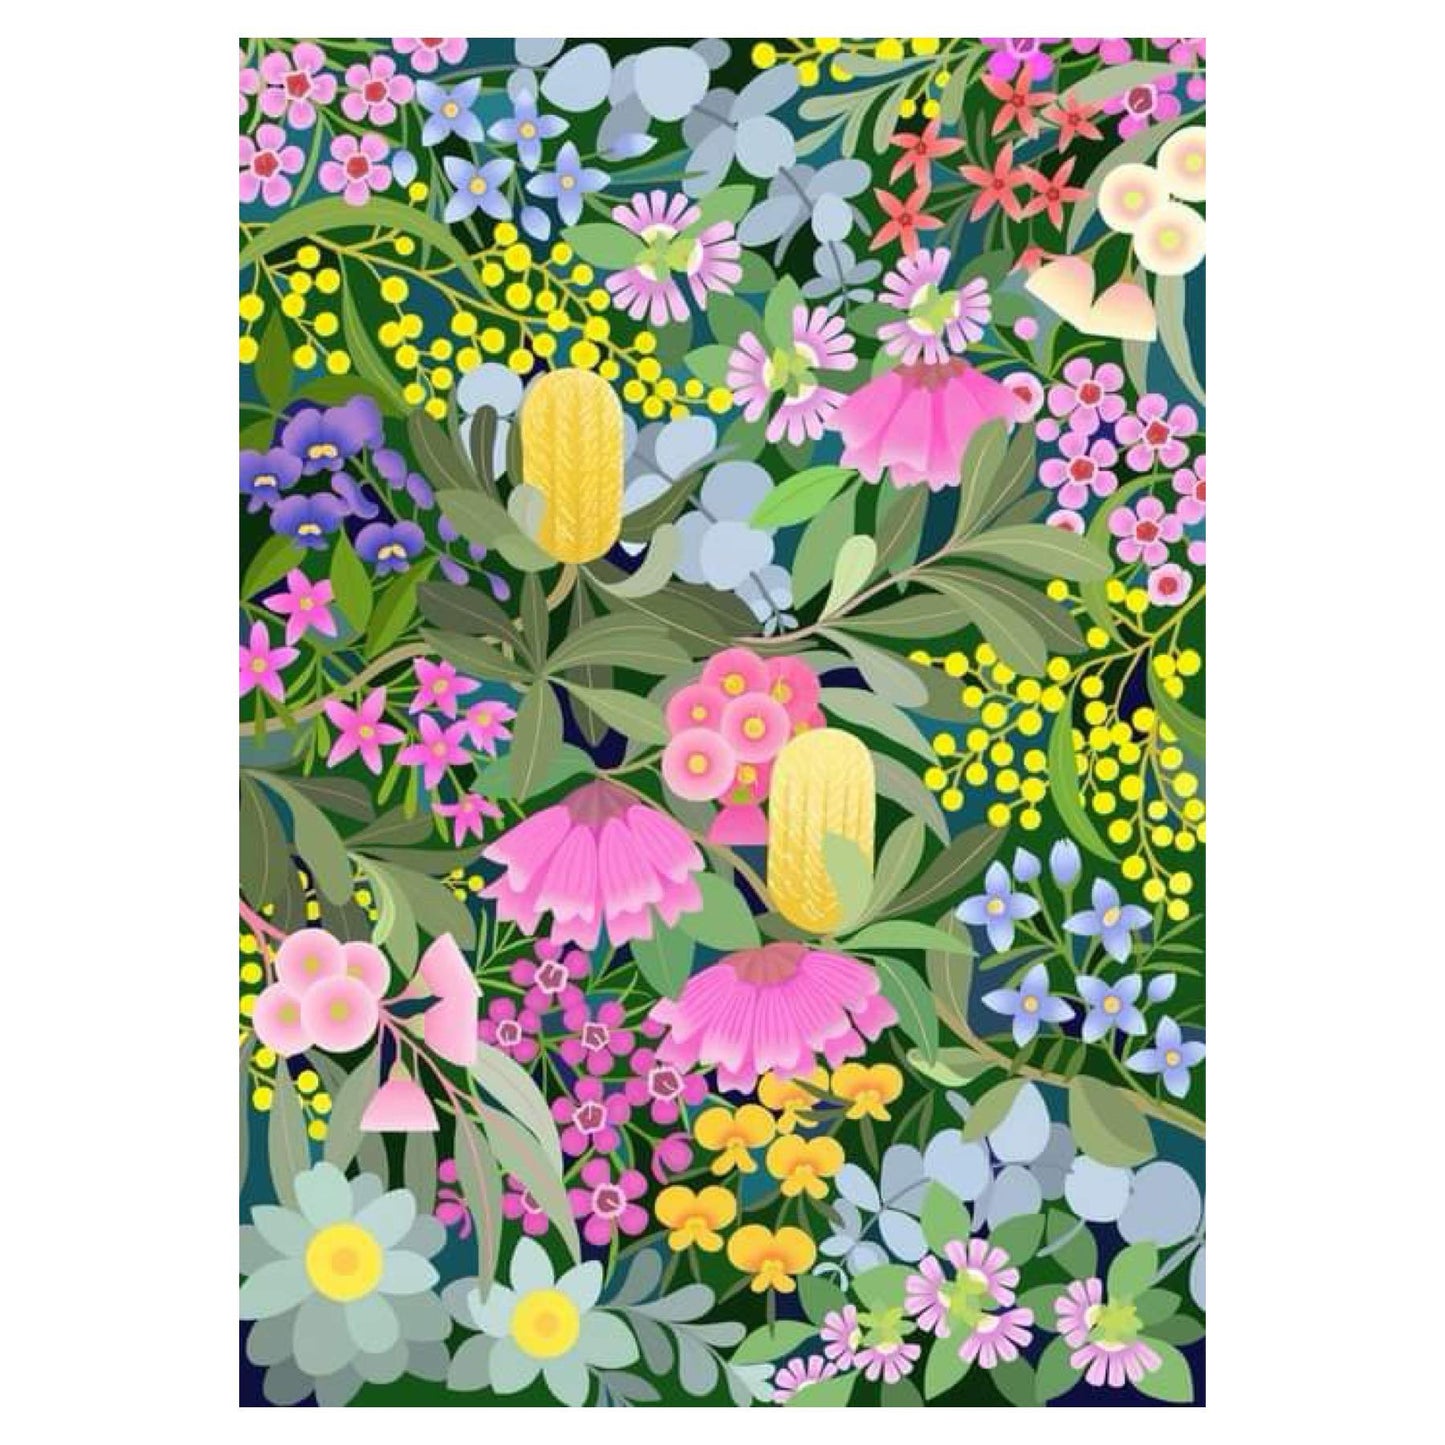 CLAIRE ISHINO- LARGE LIMITED EDITION A3 PRINTS- AUSTRALIAN NATIVE FLORA